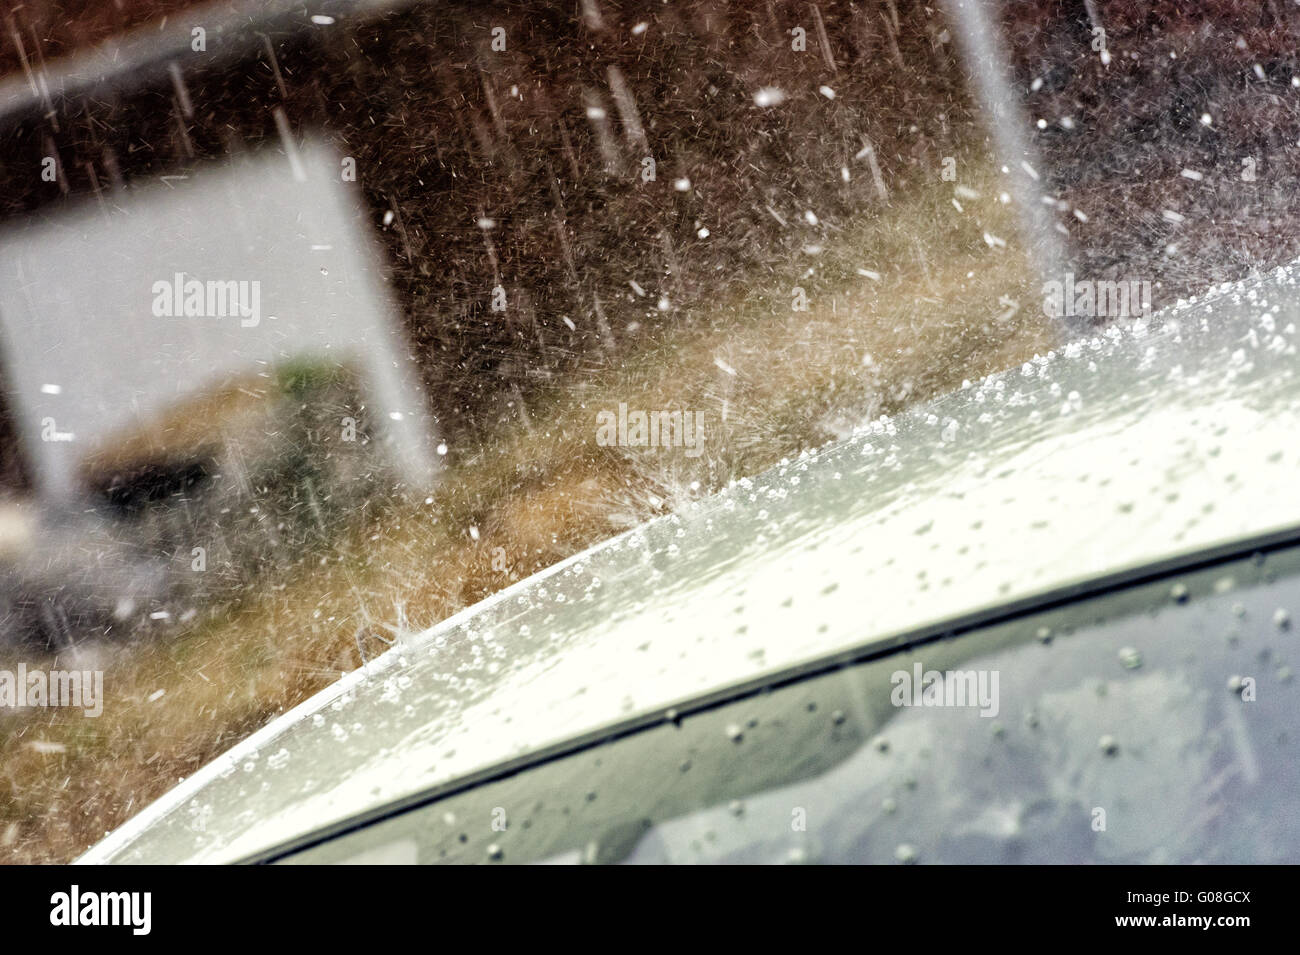 Roof of a car in a hailstorm Stock Photo